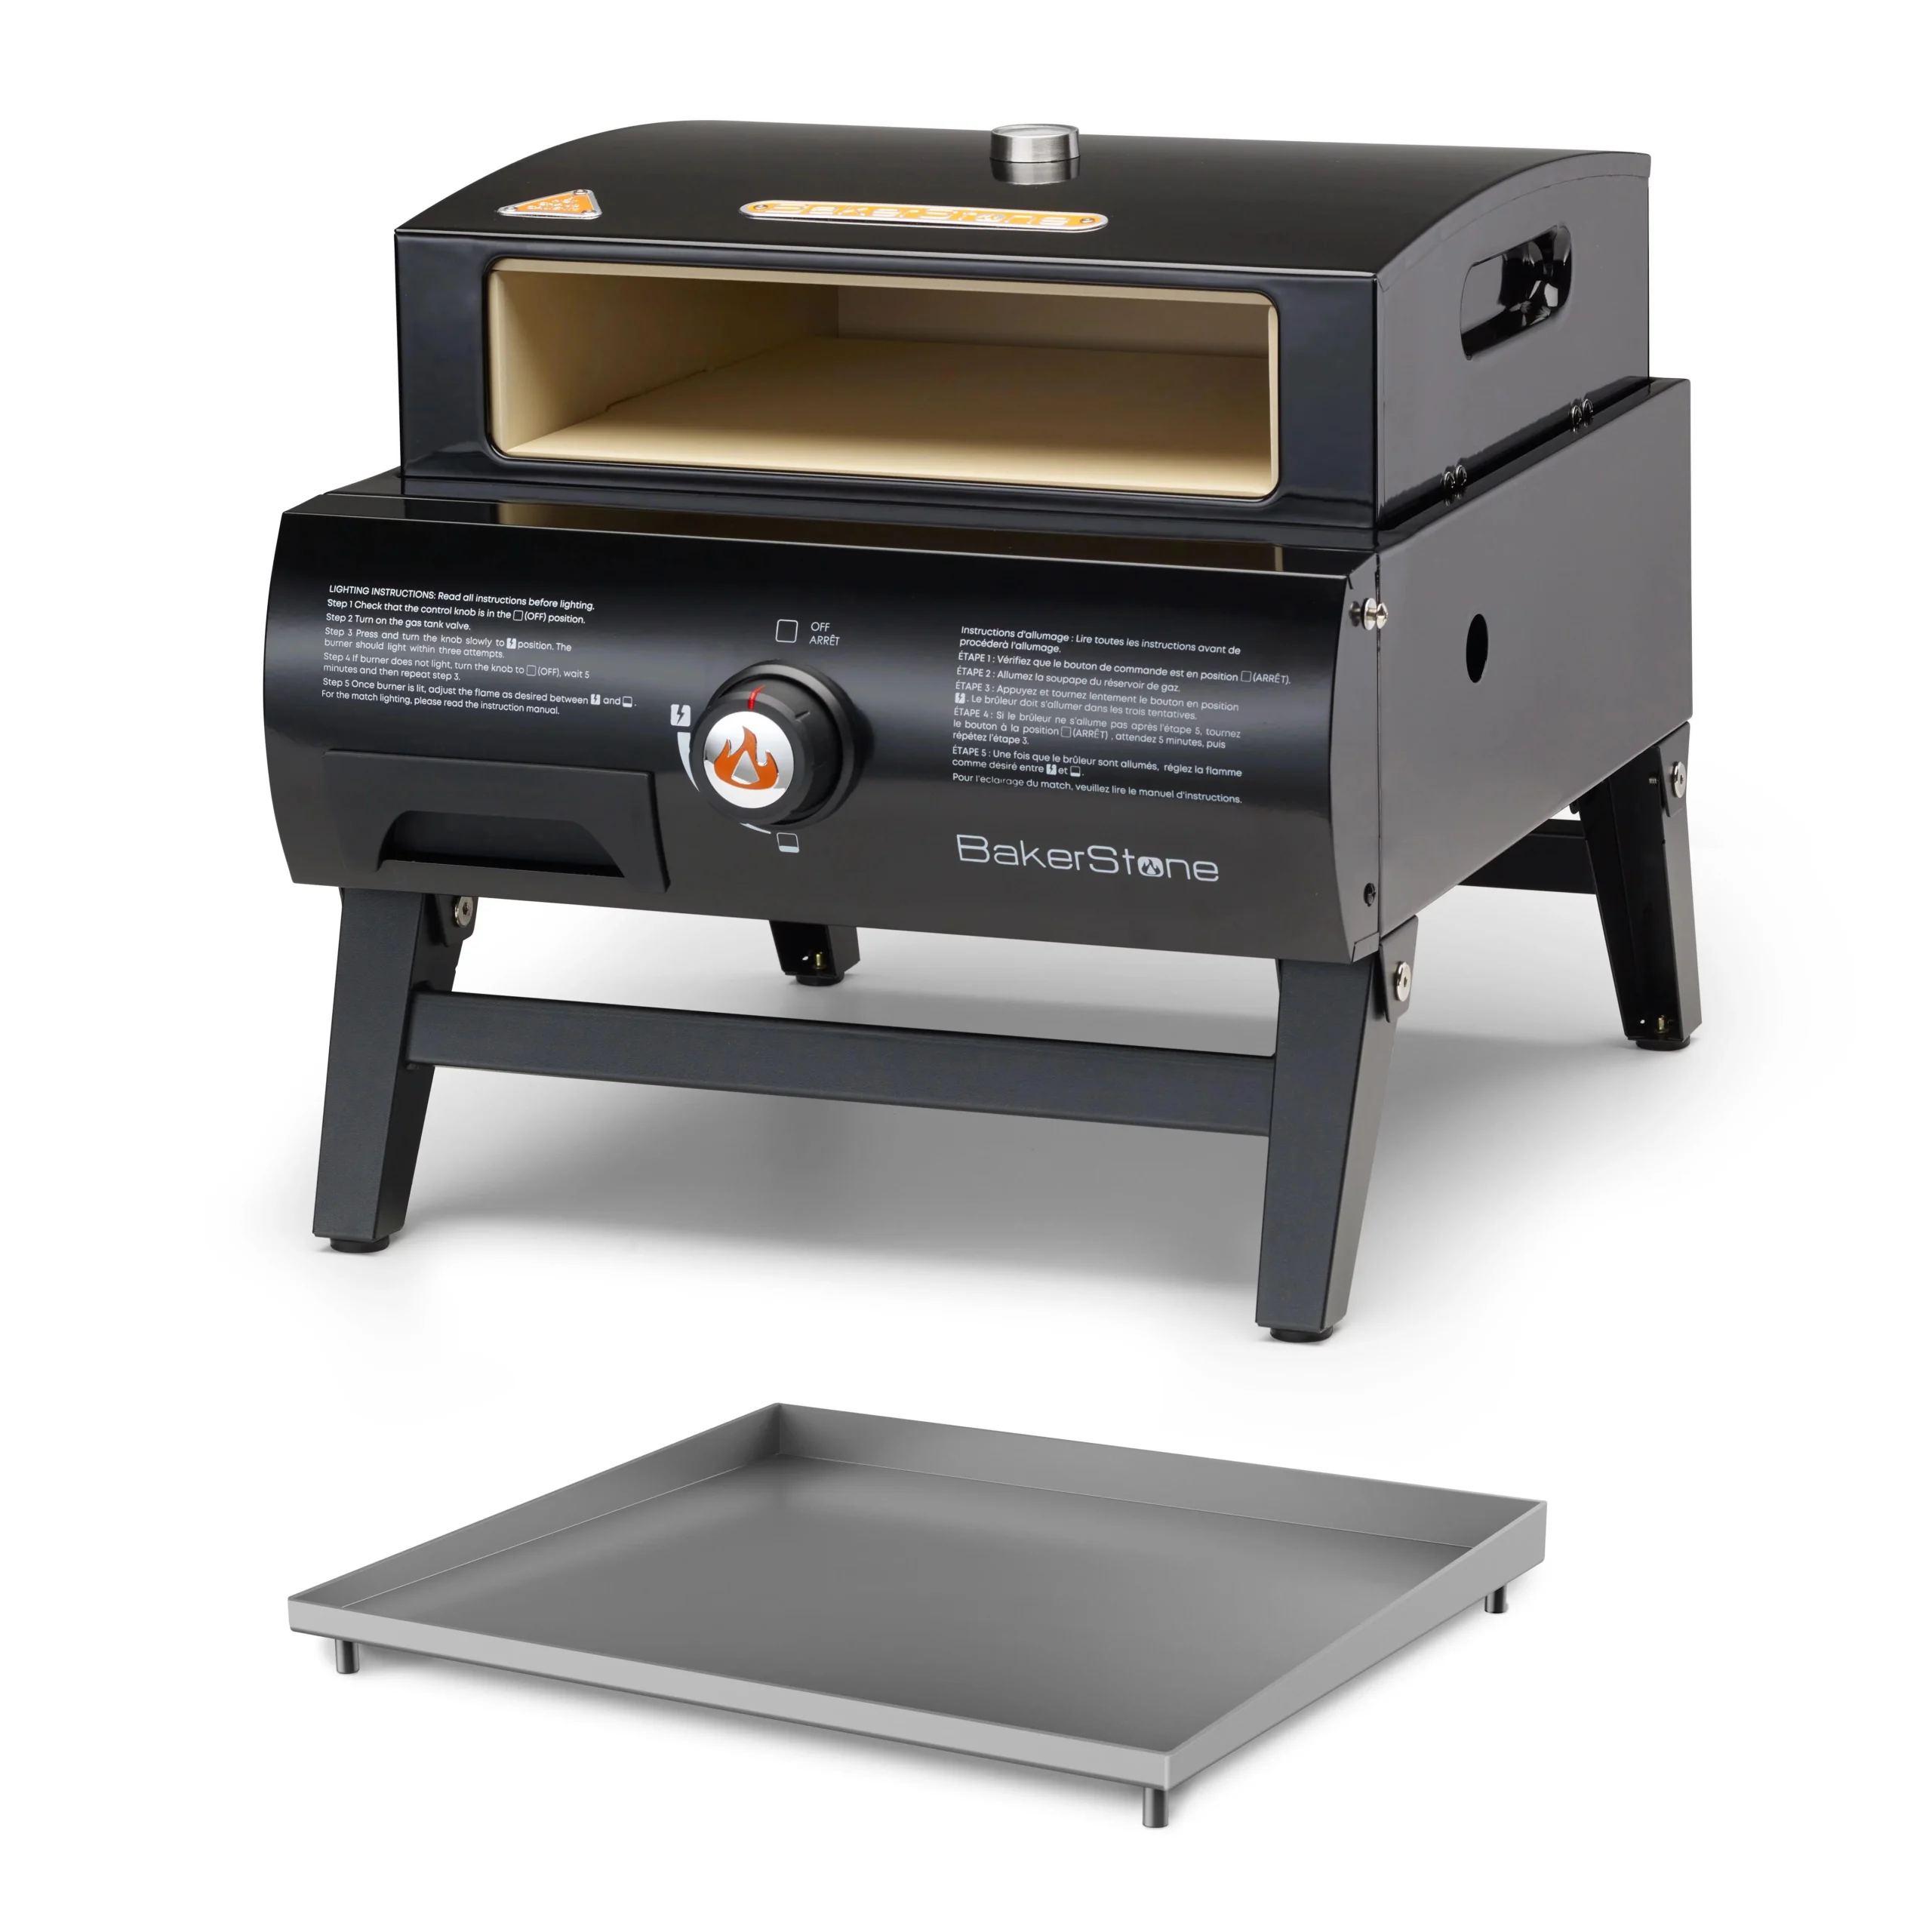 bakerstone pizza oven - Can you use a BakerStone pizza oven on a griddle